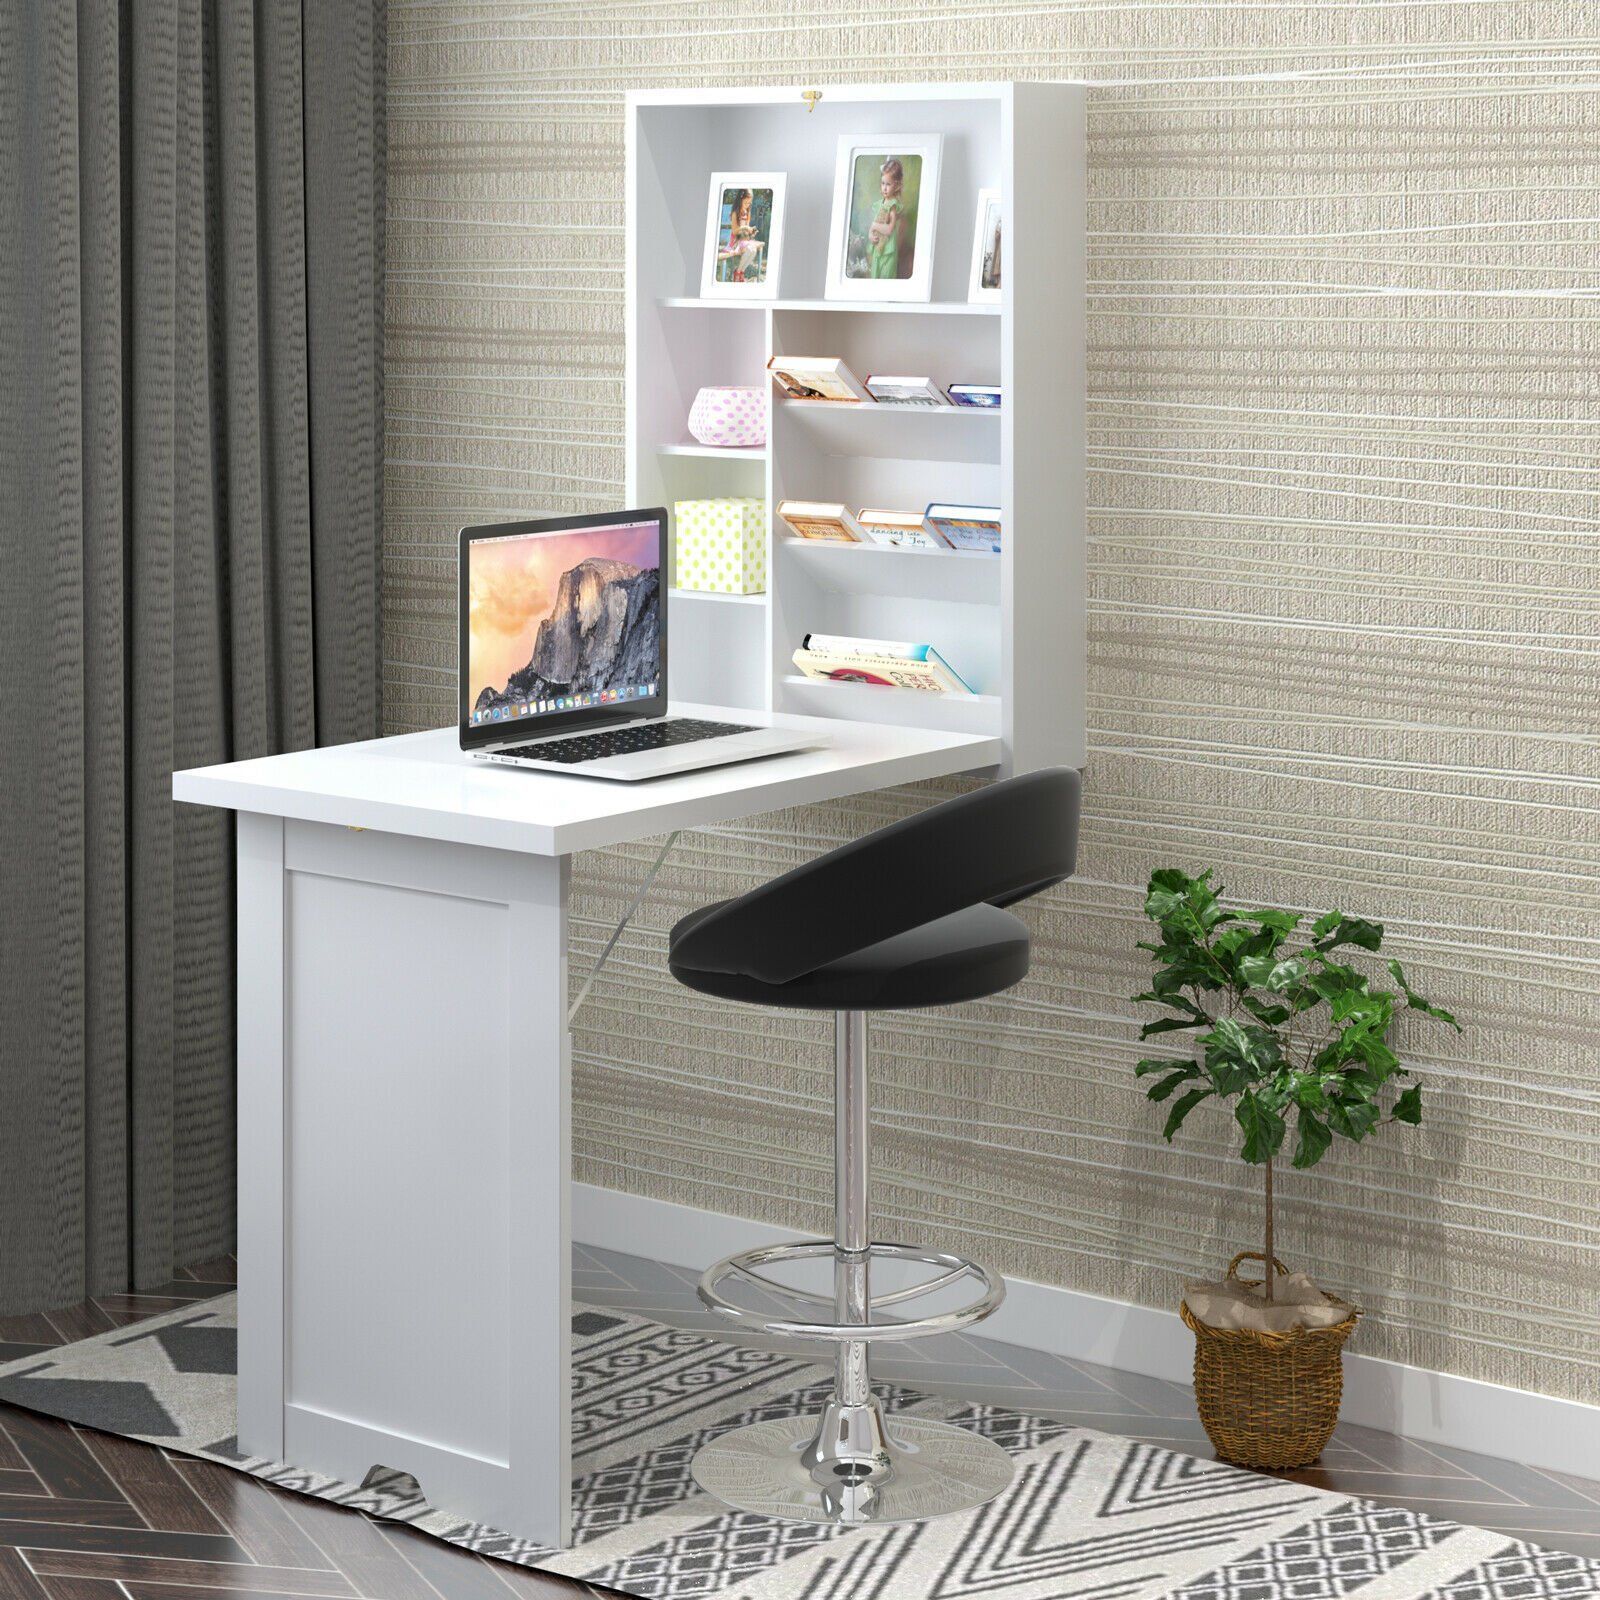 Gymax Wall Mounted Fold Out Convertible Floating Desk Space Saver Throughout Matte White Wall Mount Desks (View 3 of 15)